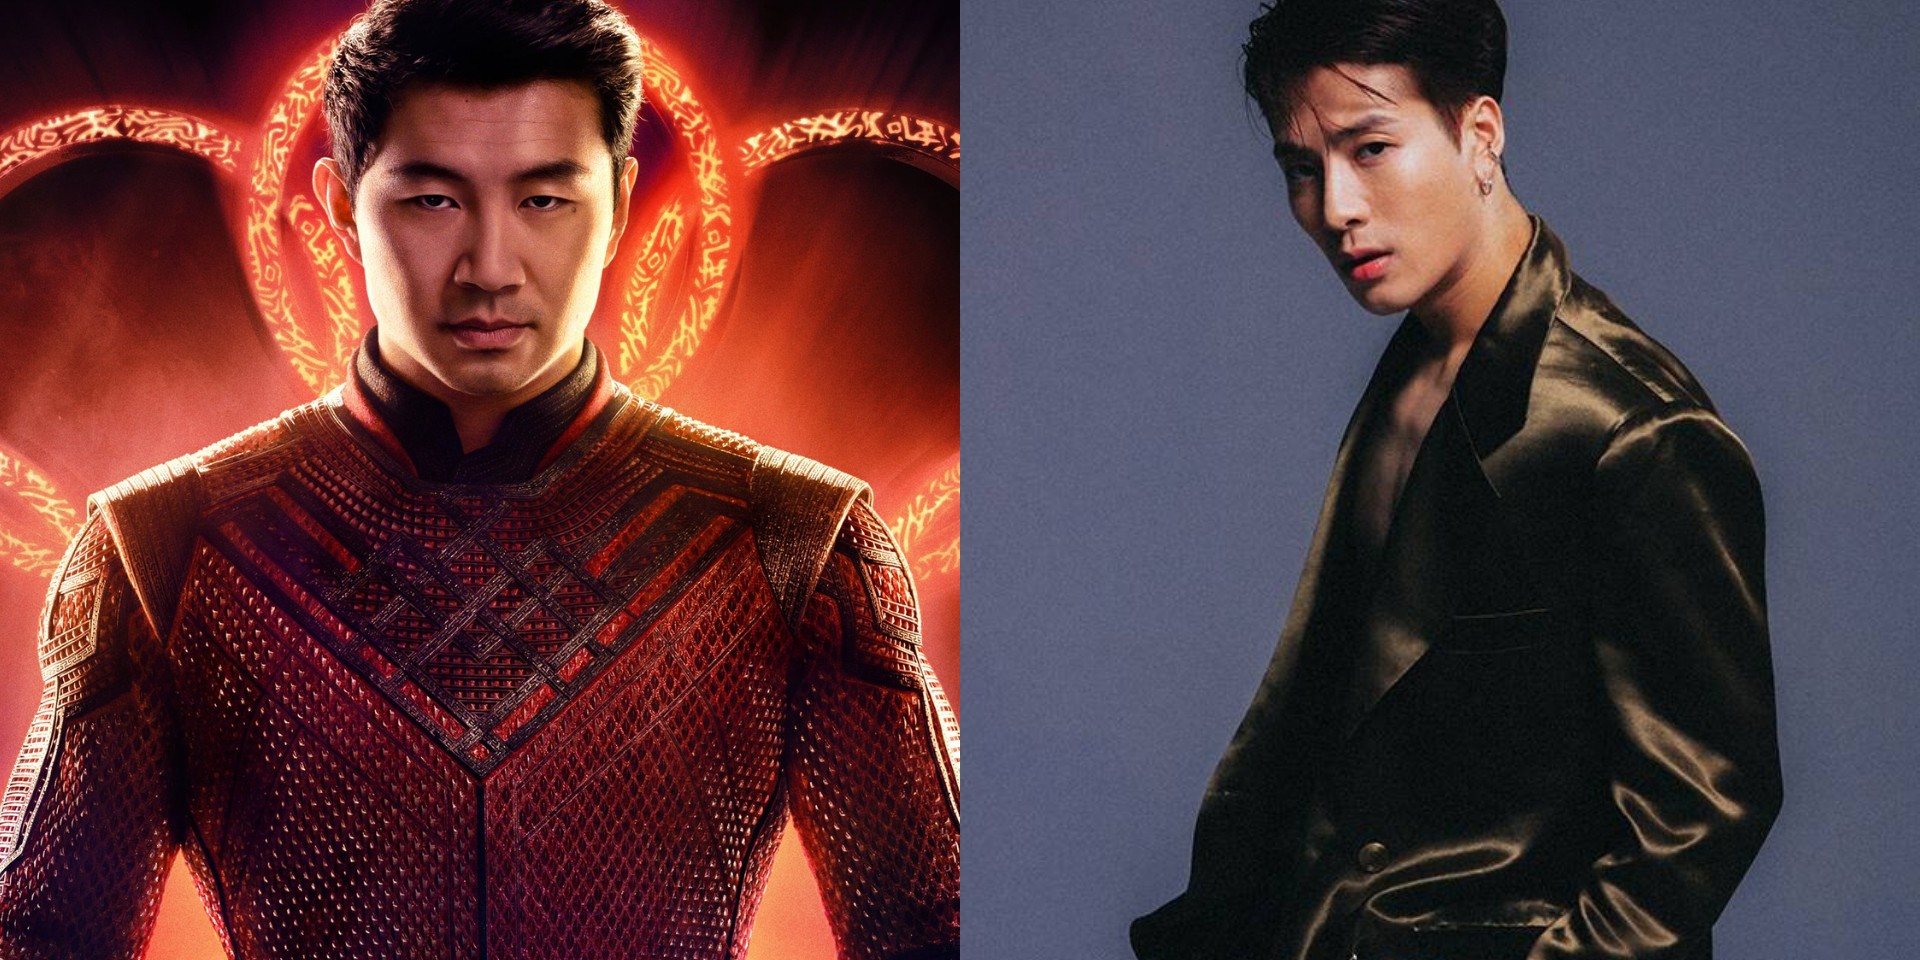 GOT7's Jackson Wang features in the official trailer of Marvel's 'Shang-Chi and the Legend of the Ten Rings' 